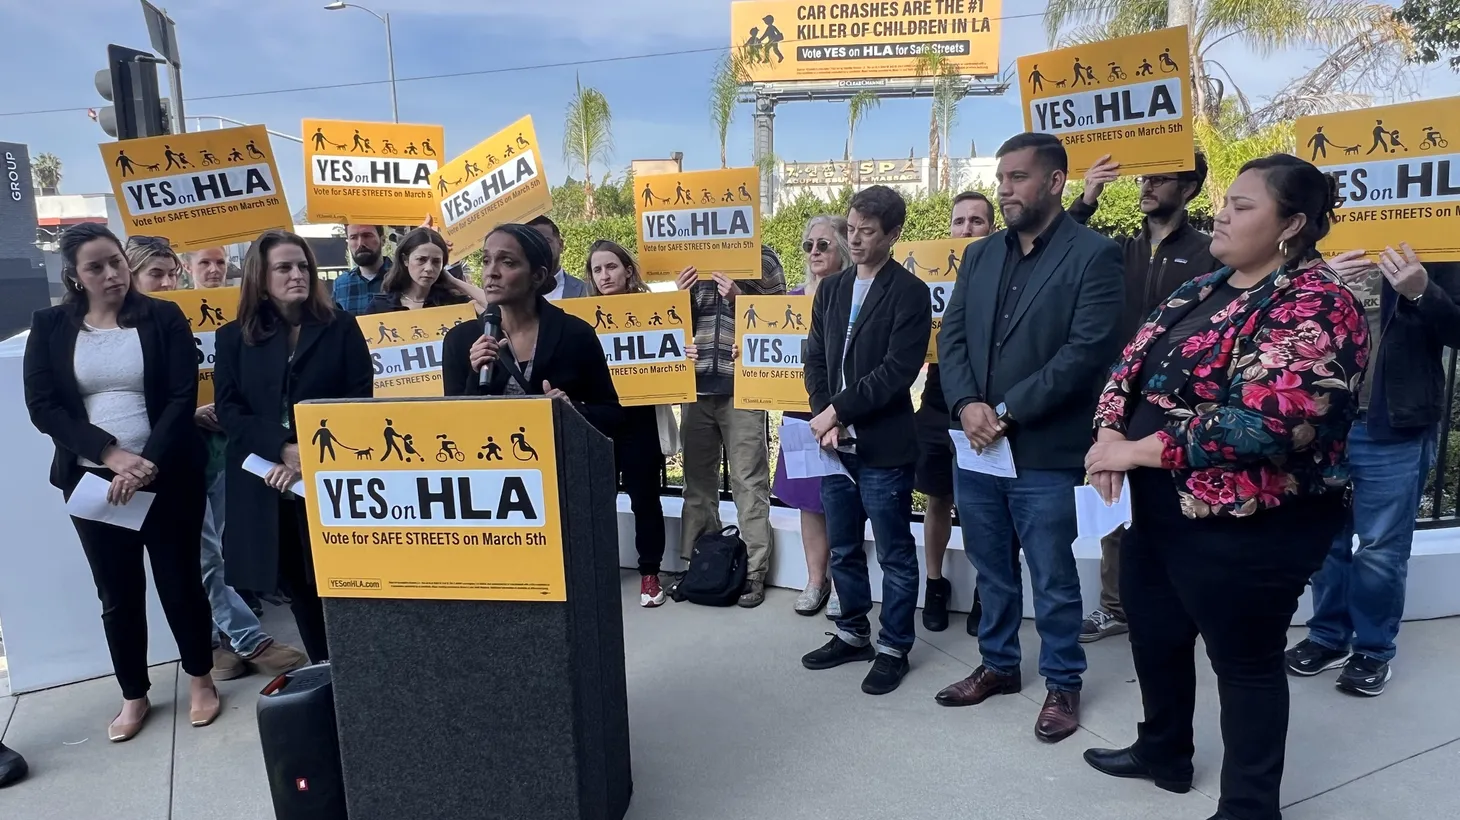 Supporters of the traffic safety ballot measure HLA, including members of the Los Angeles City Council, hold a press conference along Vermont Avenue, where many pedestrian deaths have occurred. Behind the speakers is a billboard sponsored by the Yes on HLA campaign.